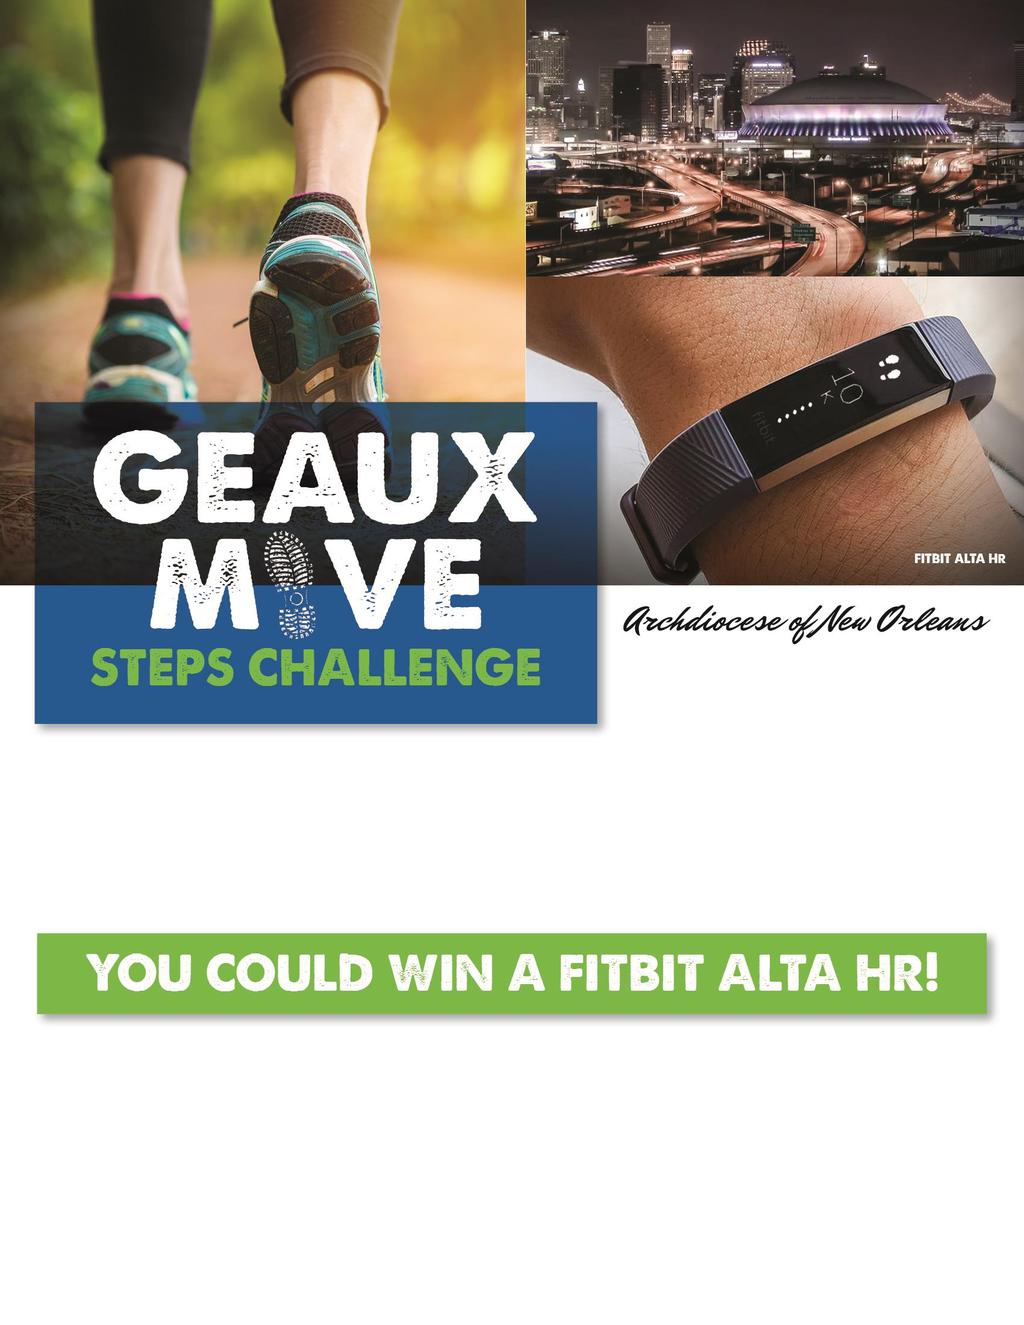 As a part of the, we invite you to participate in the Geaux Move Step Challenge!